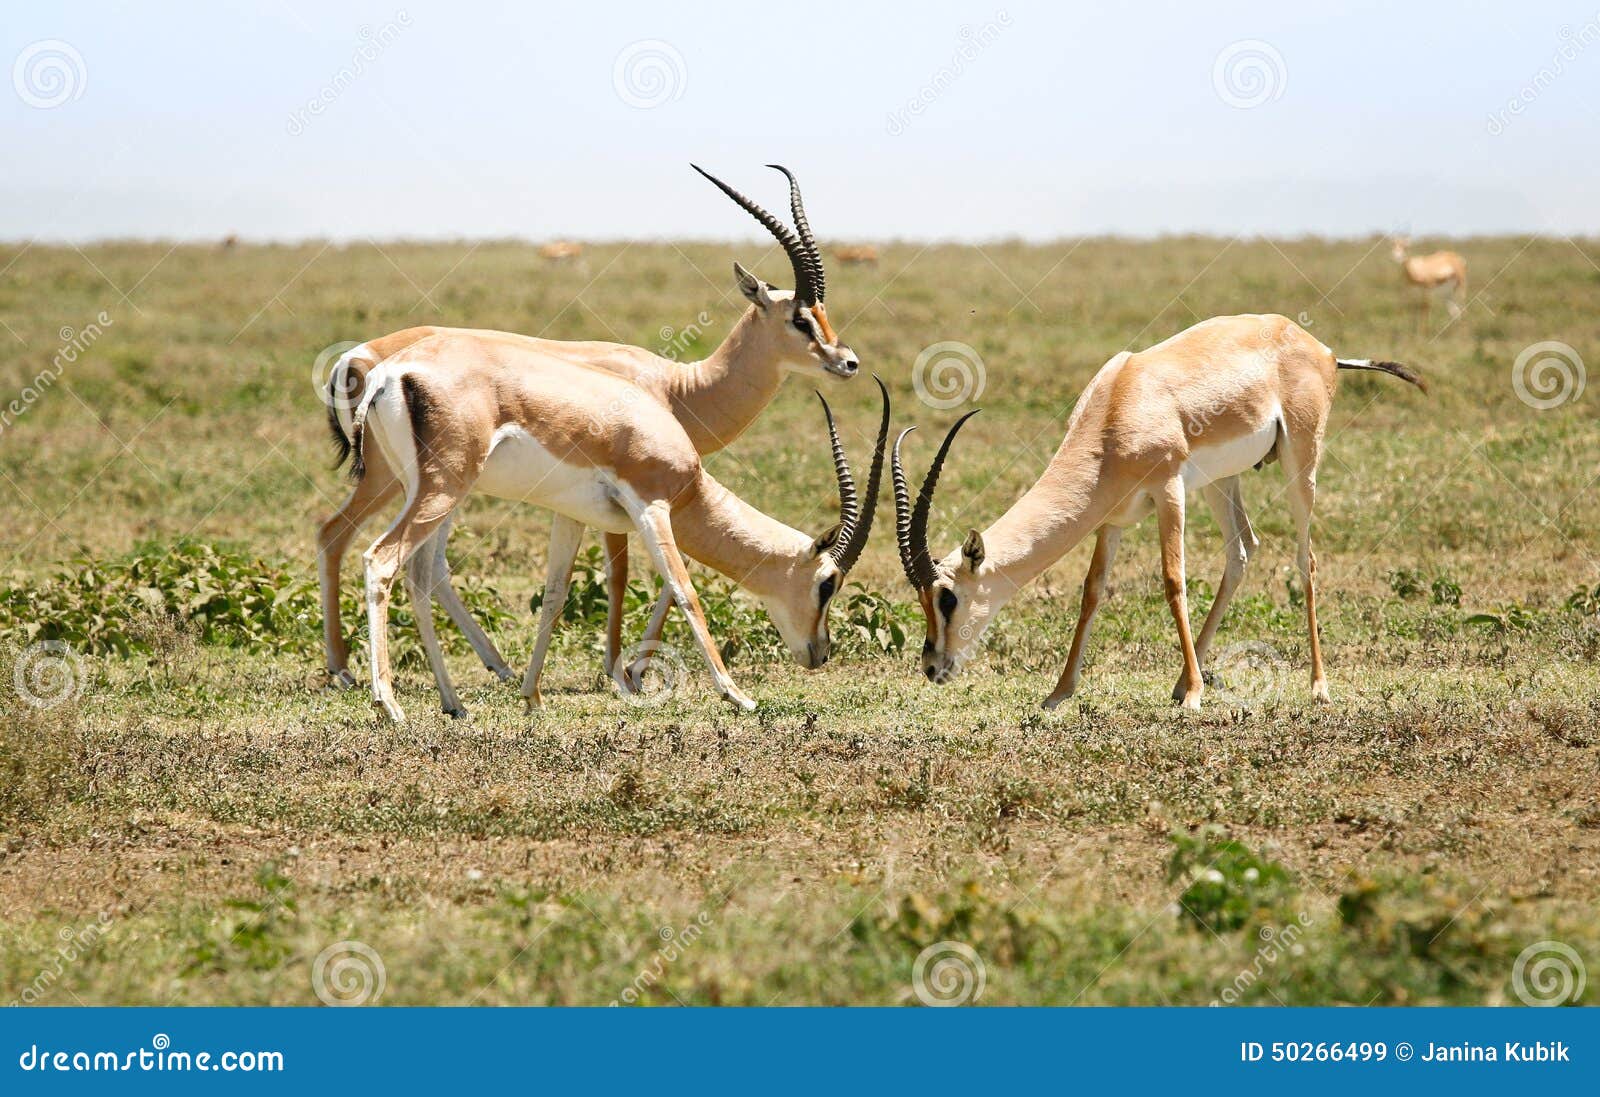 Hunting Gazelles - Free & Royalty-Free Stock Photos from Dreamstime